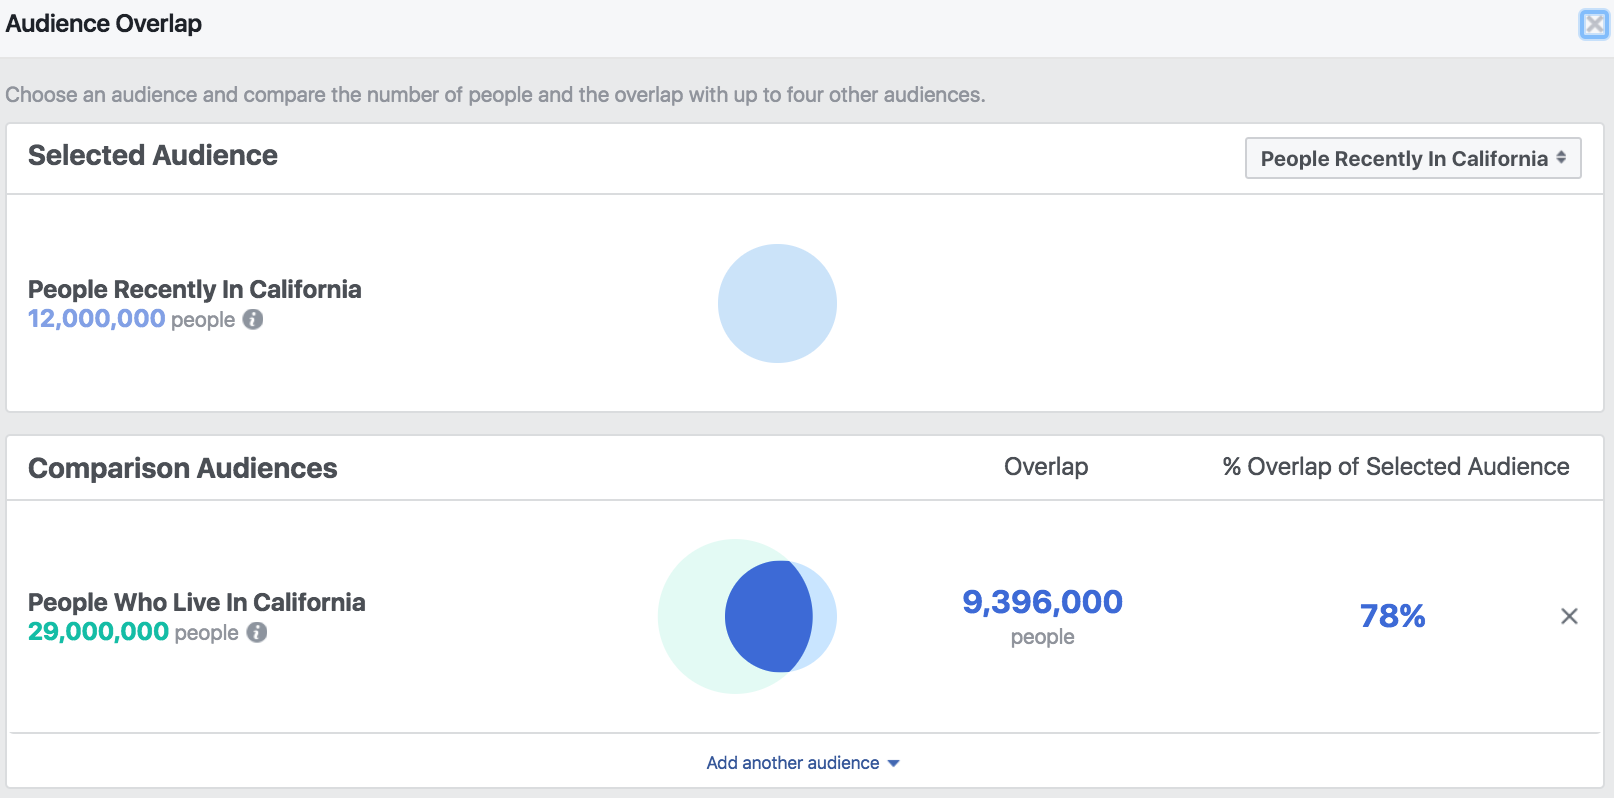 Facebook Location Targeting - Audience Overlap People Recently In vs People Who Live In California